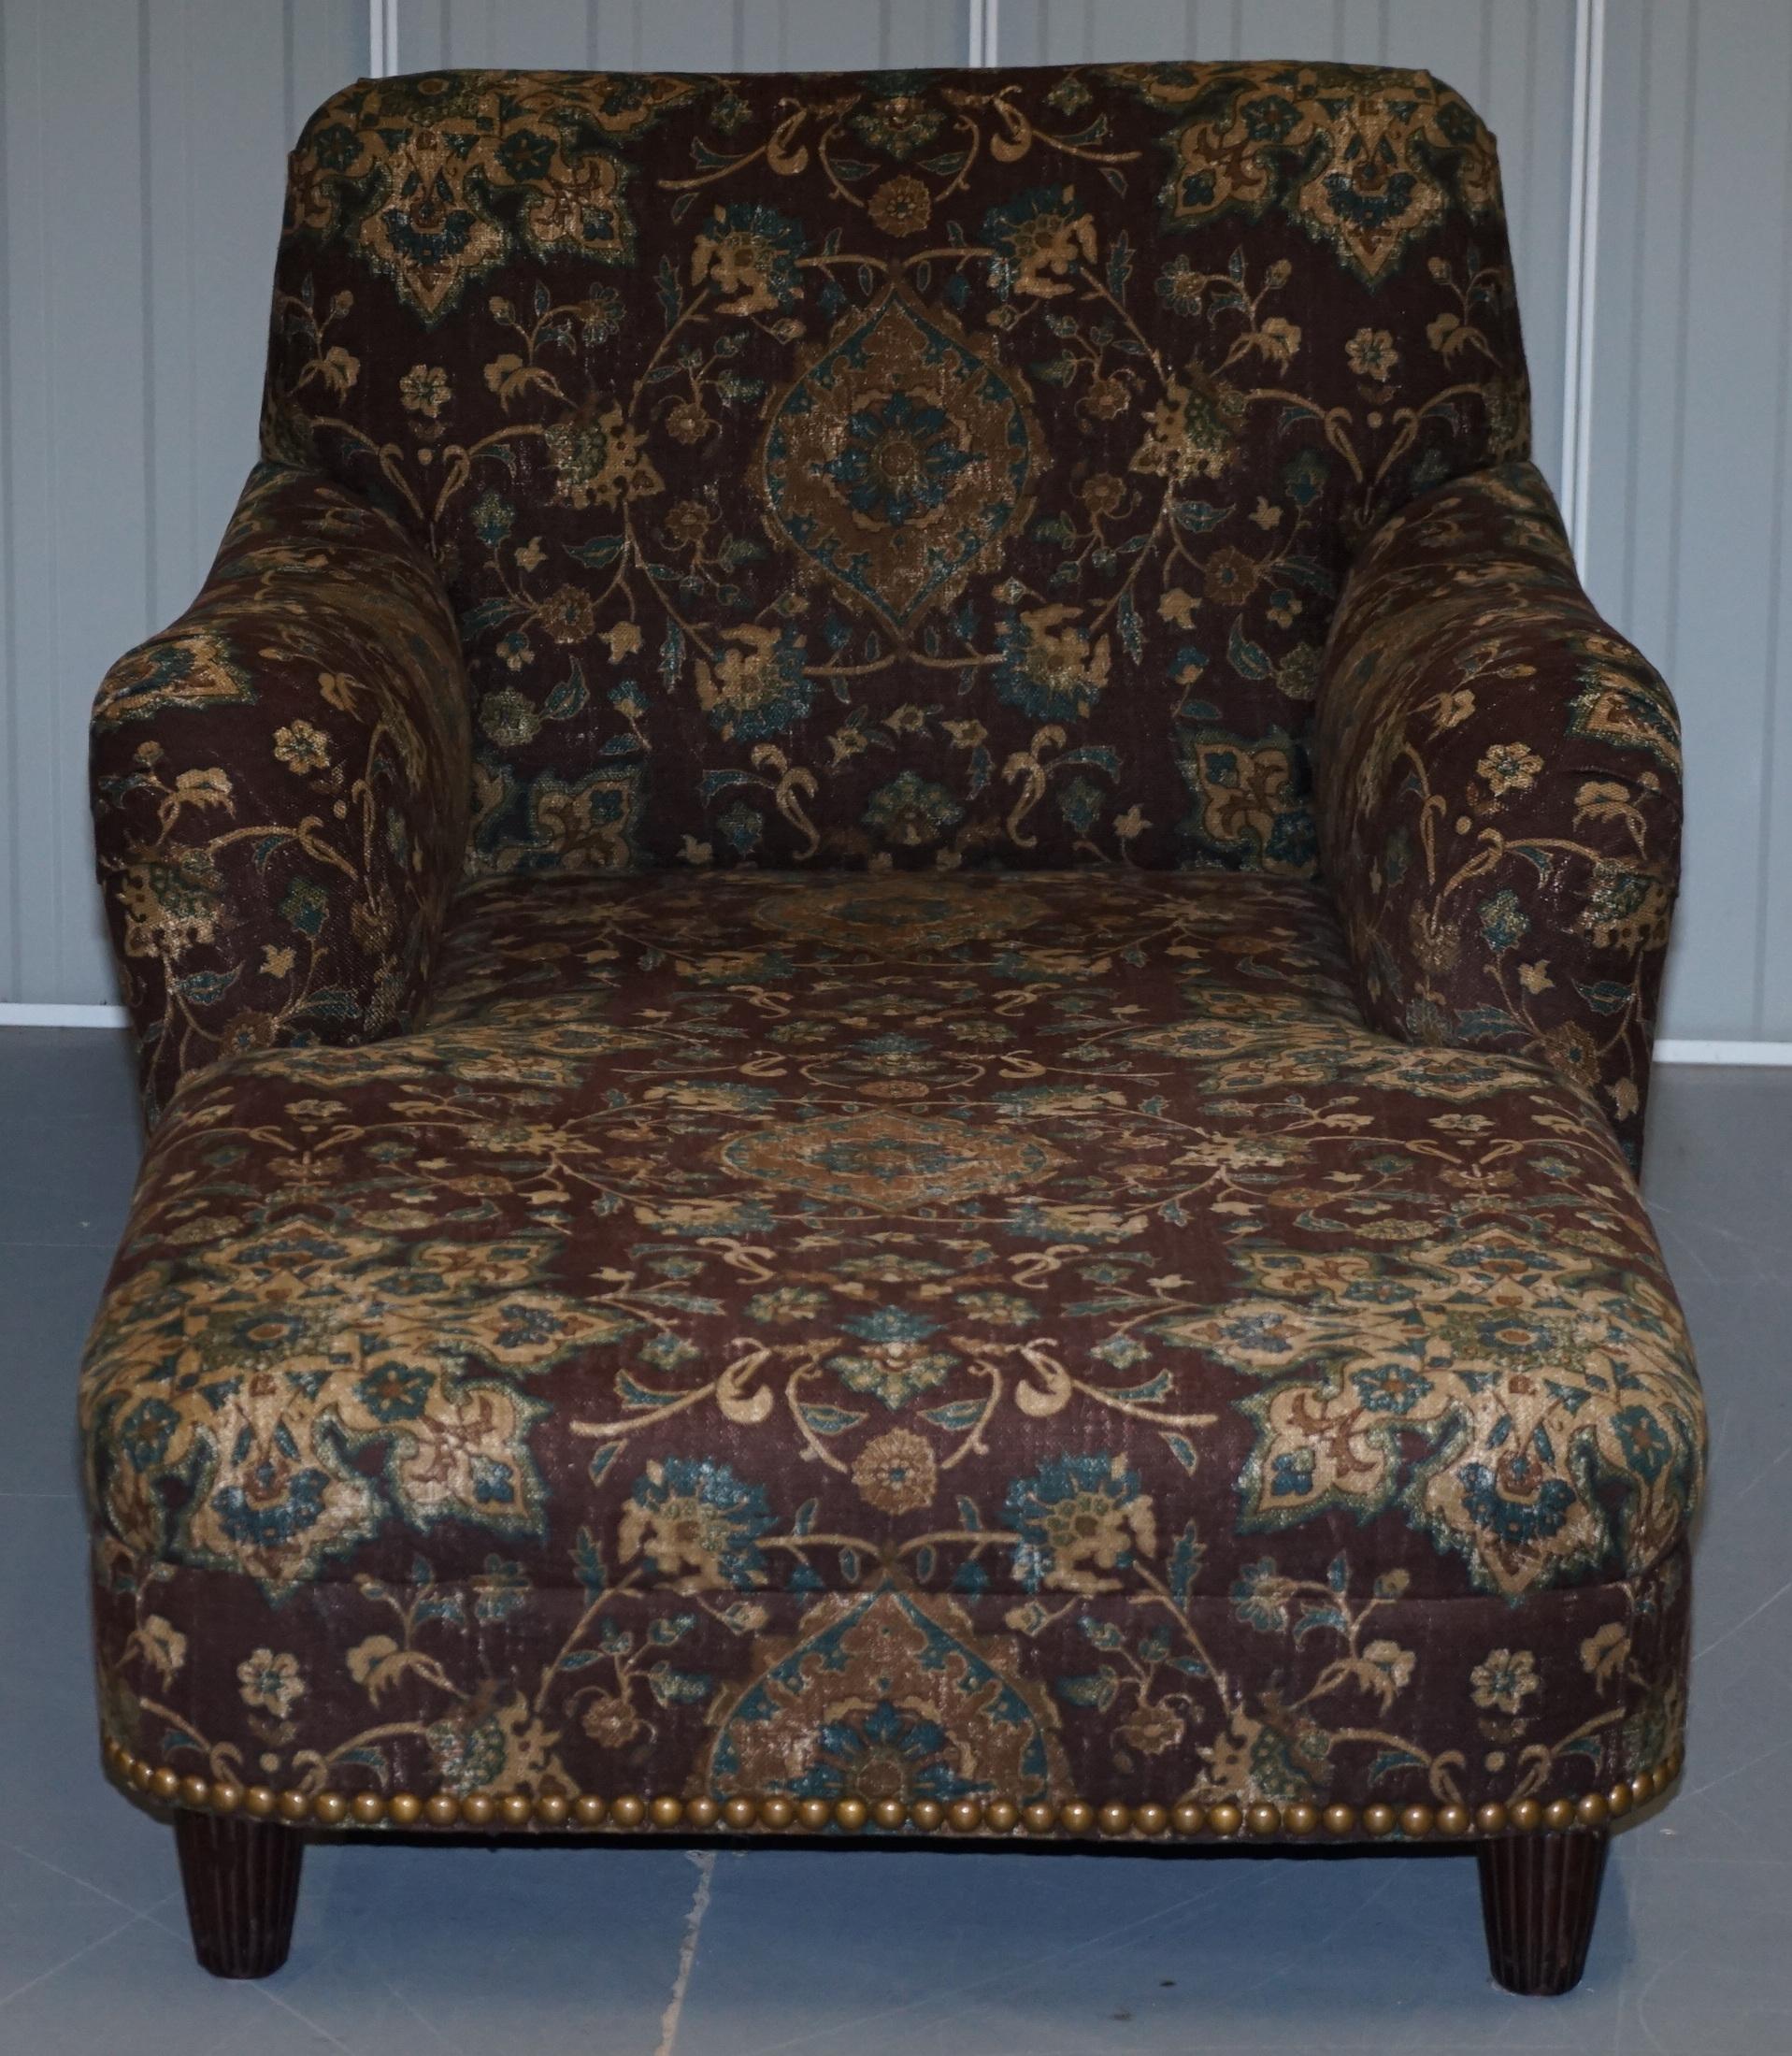 English Large Oversized Ralph Lauren Chaise Lounge Sofa Armchair Floral Upholstery